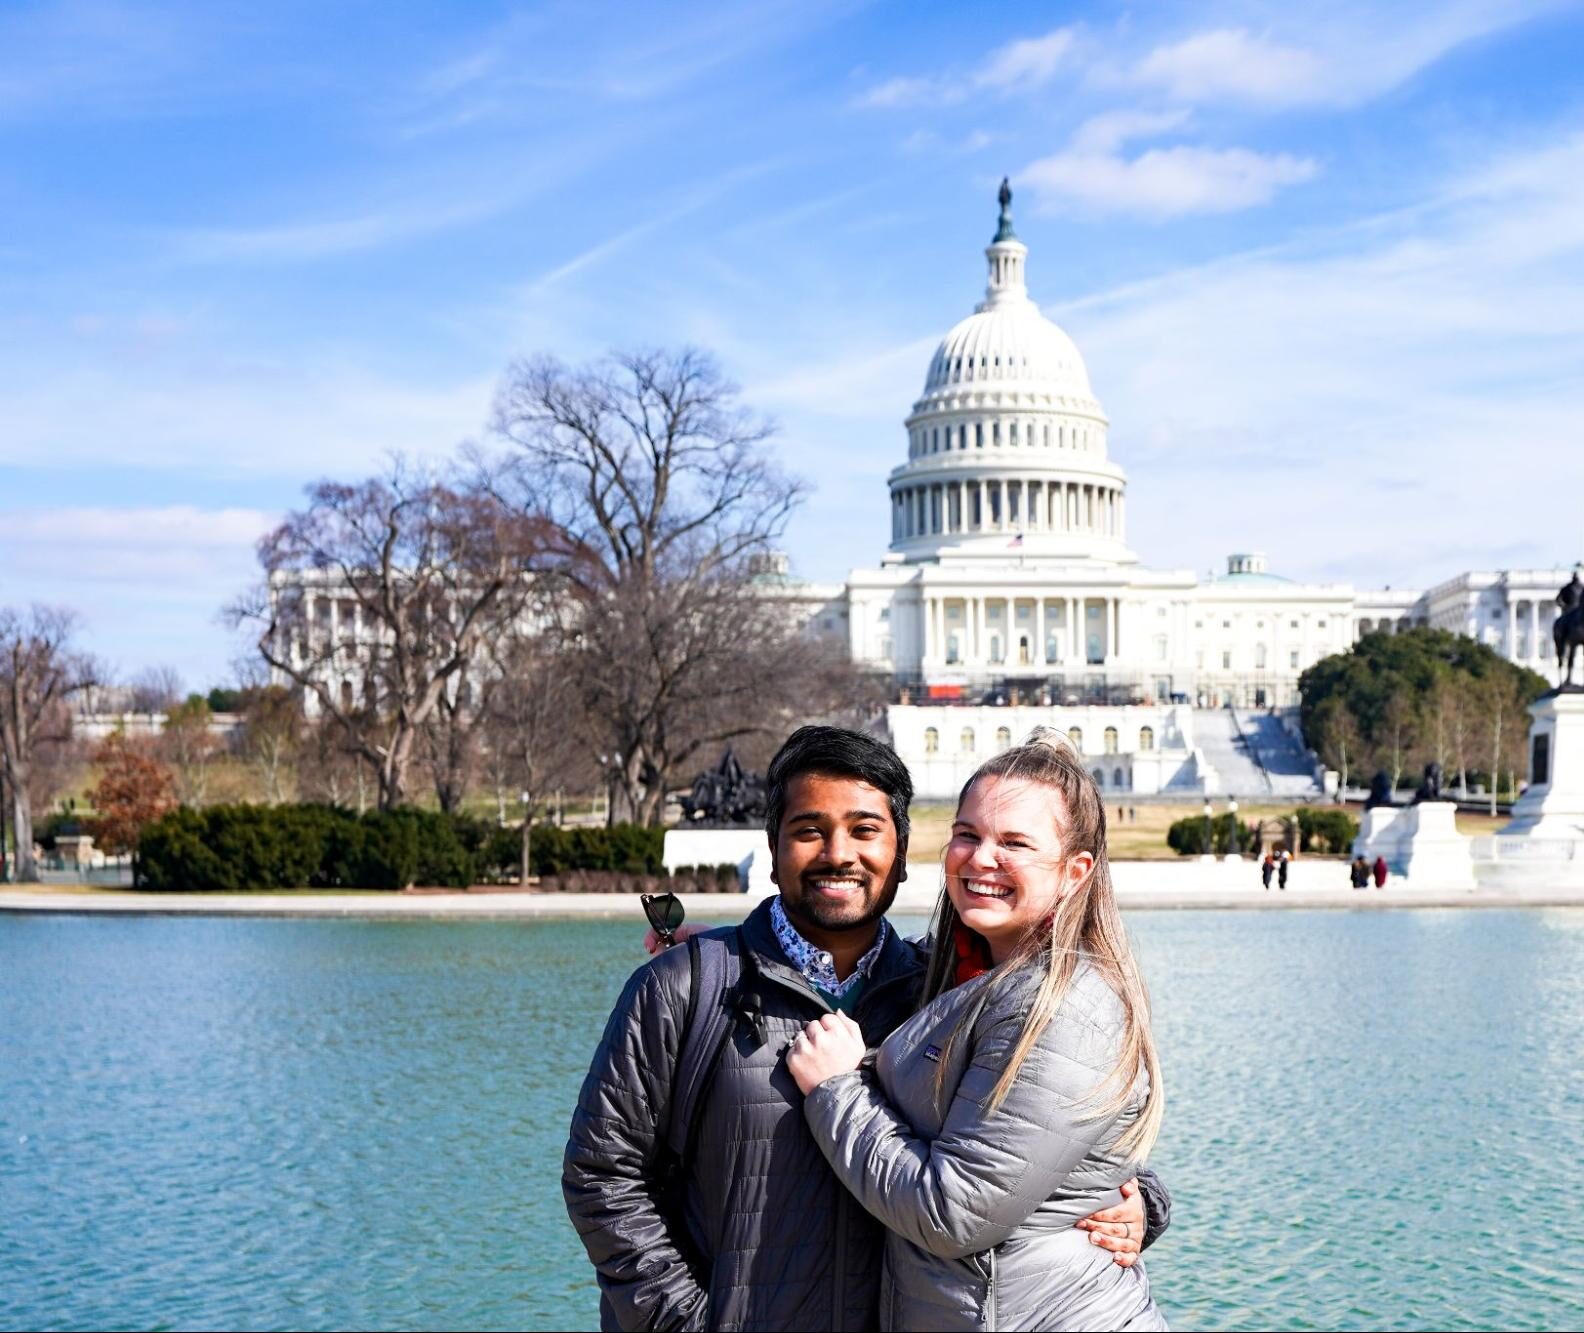 Tales of a Digital Nomad: Our Favorite Restaurants and Free Activities in Washington, D.C.